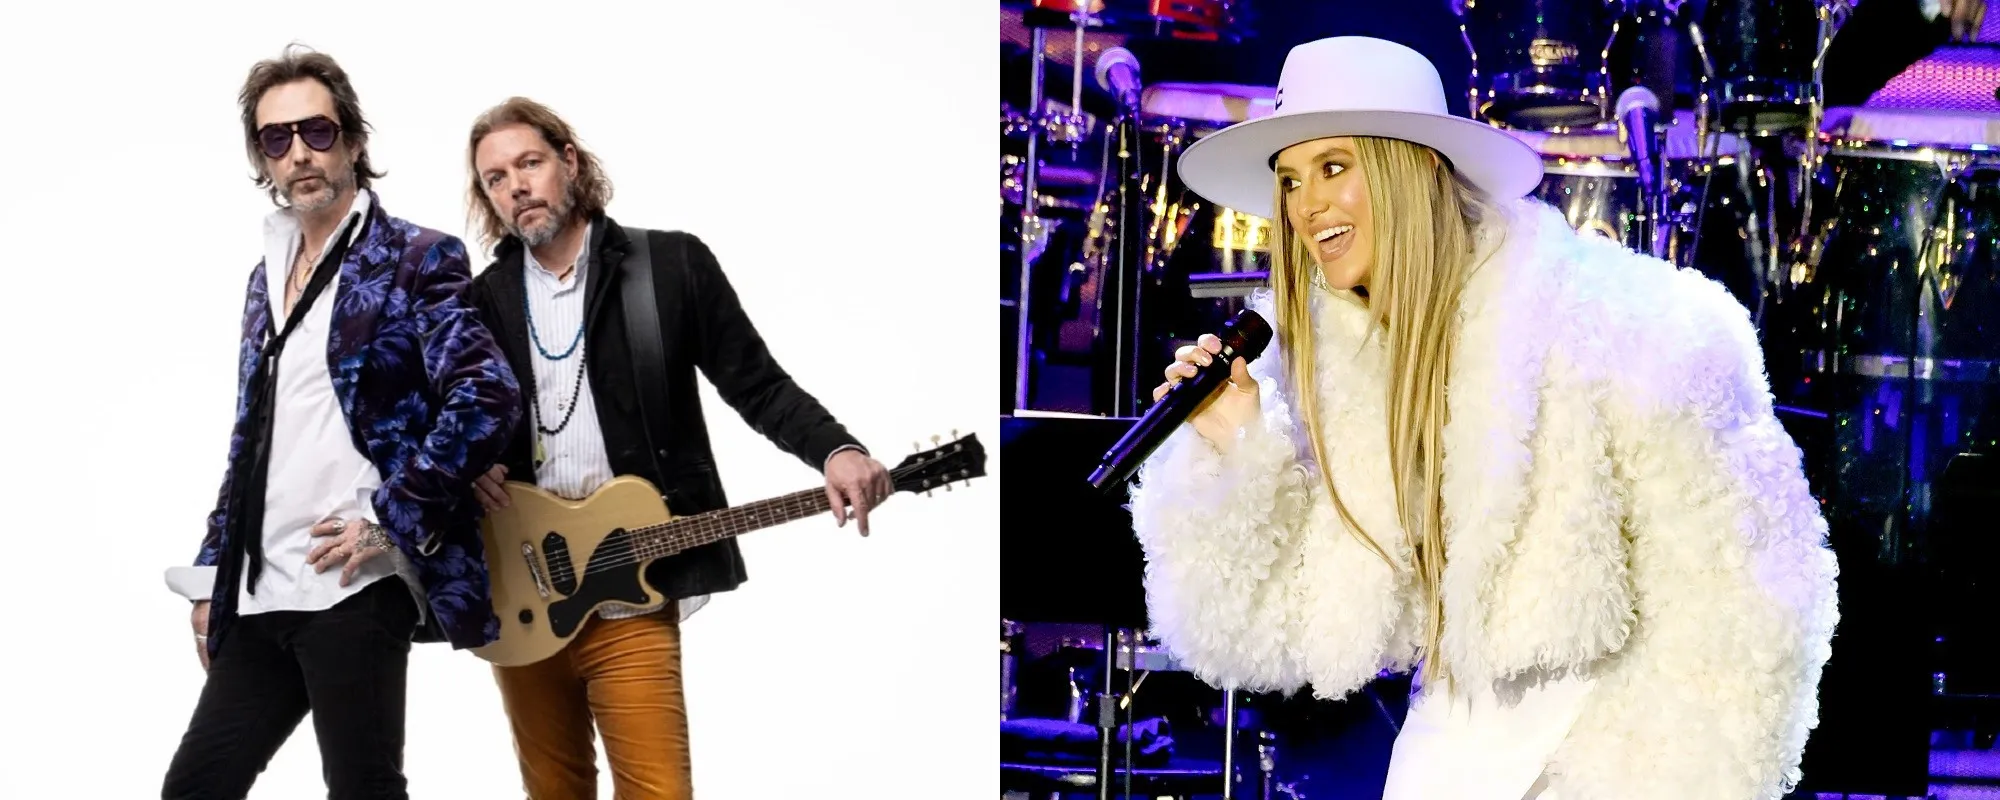 Listen: The Black Crowes Release New Song Featuring Country Star Lainey Wilson, “Wilted Rose”